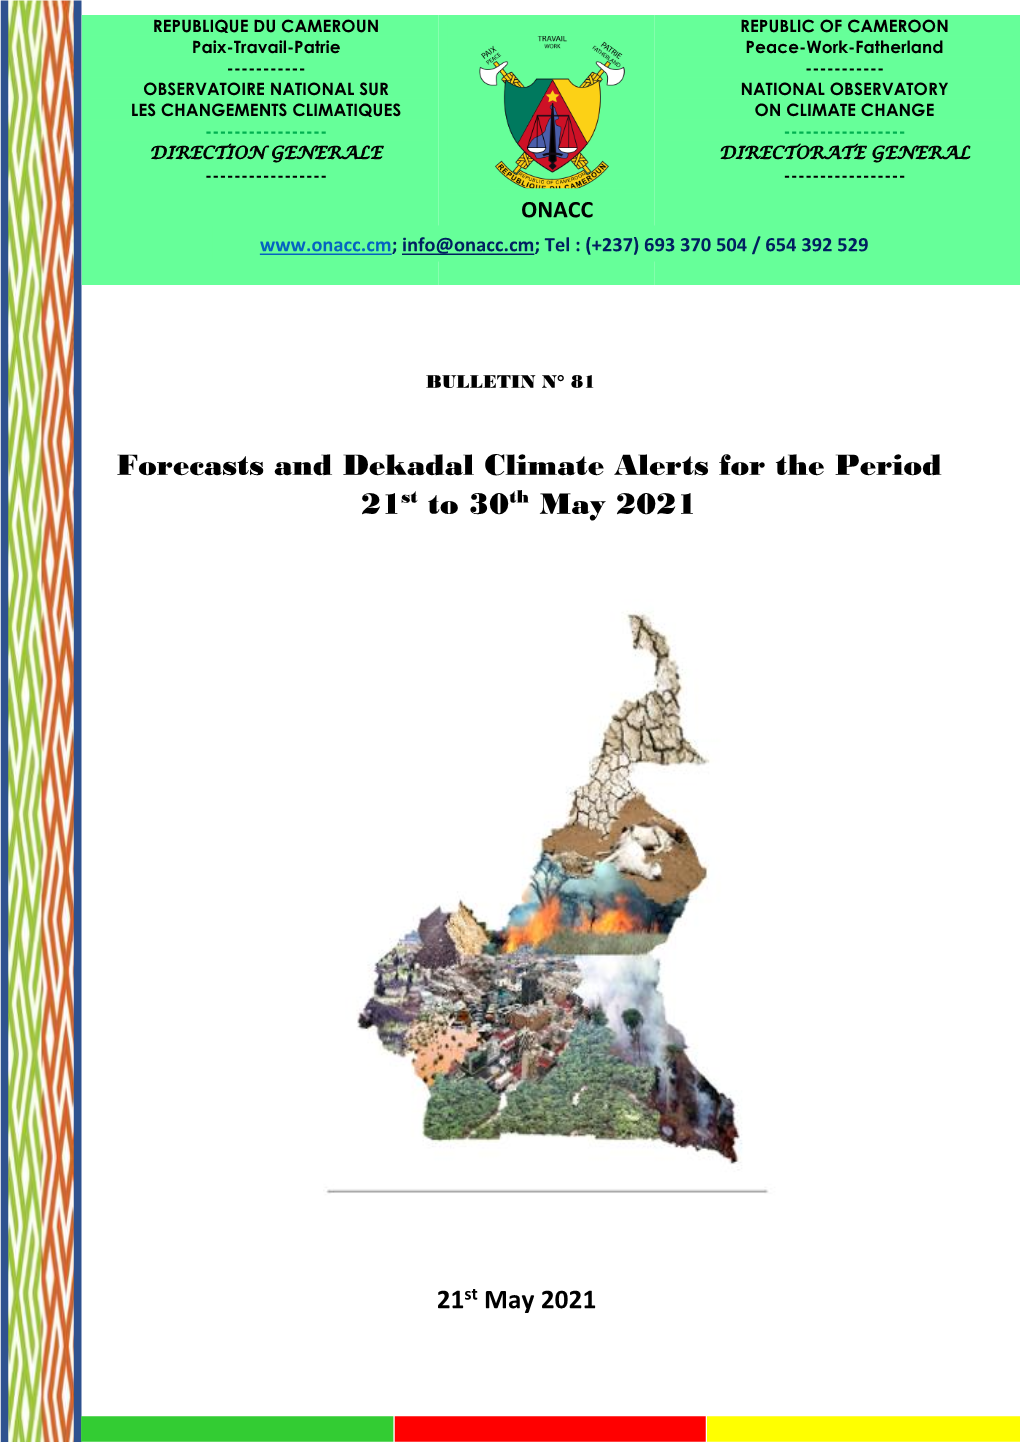 Forecasts and Dekadal Climate Alerts for the Period 21St to 30Th May 2021